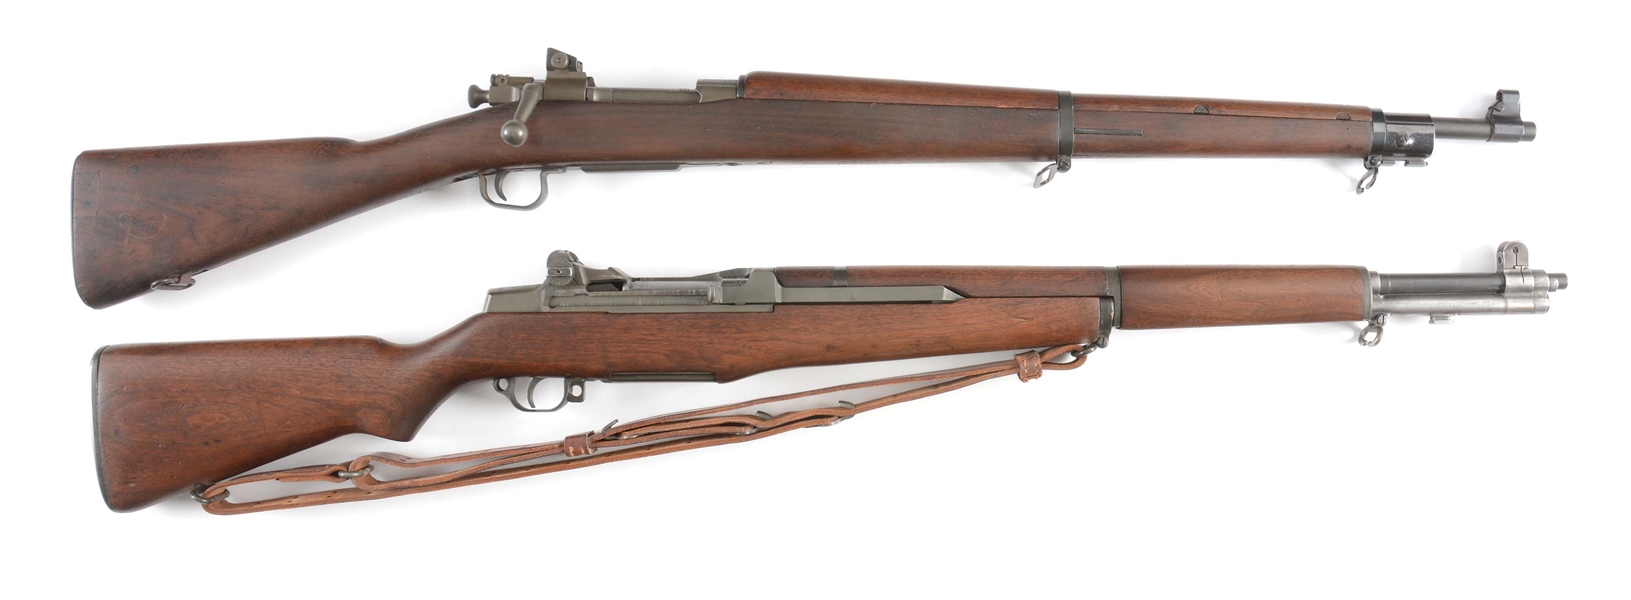 (C) LOT OF TWO: REMINGTON 1903A3 BOLT ACTION AND SPRINGFIELD M-1 GARAND SEMI-AUTOMATIC RIFLES.